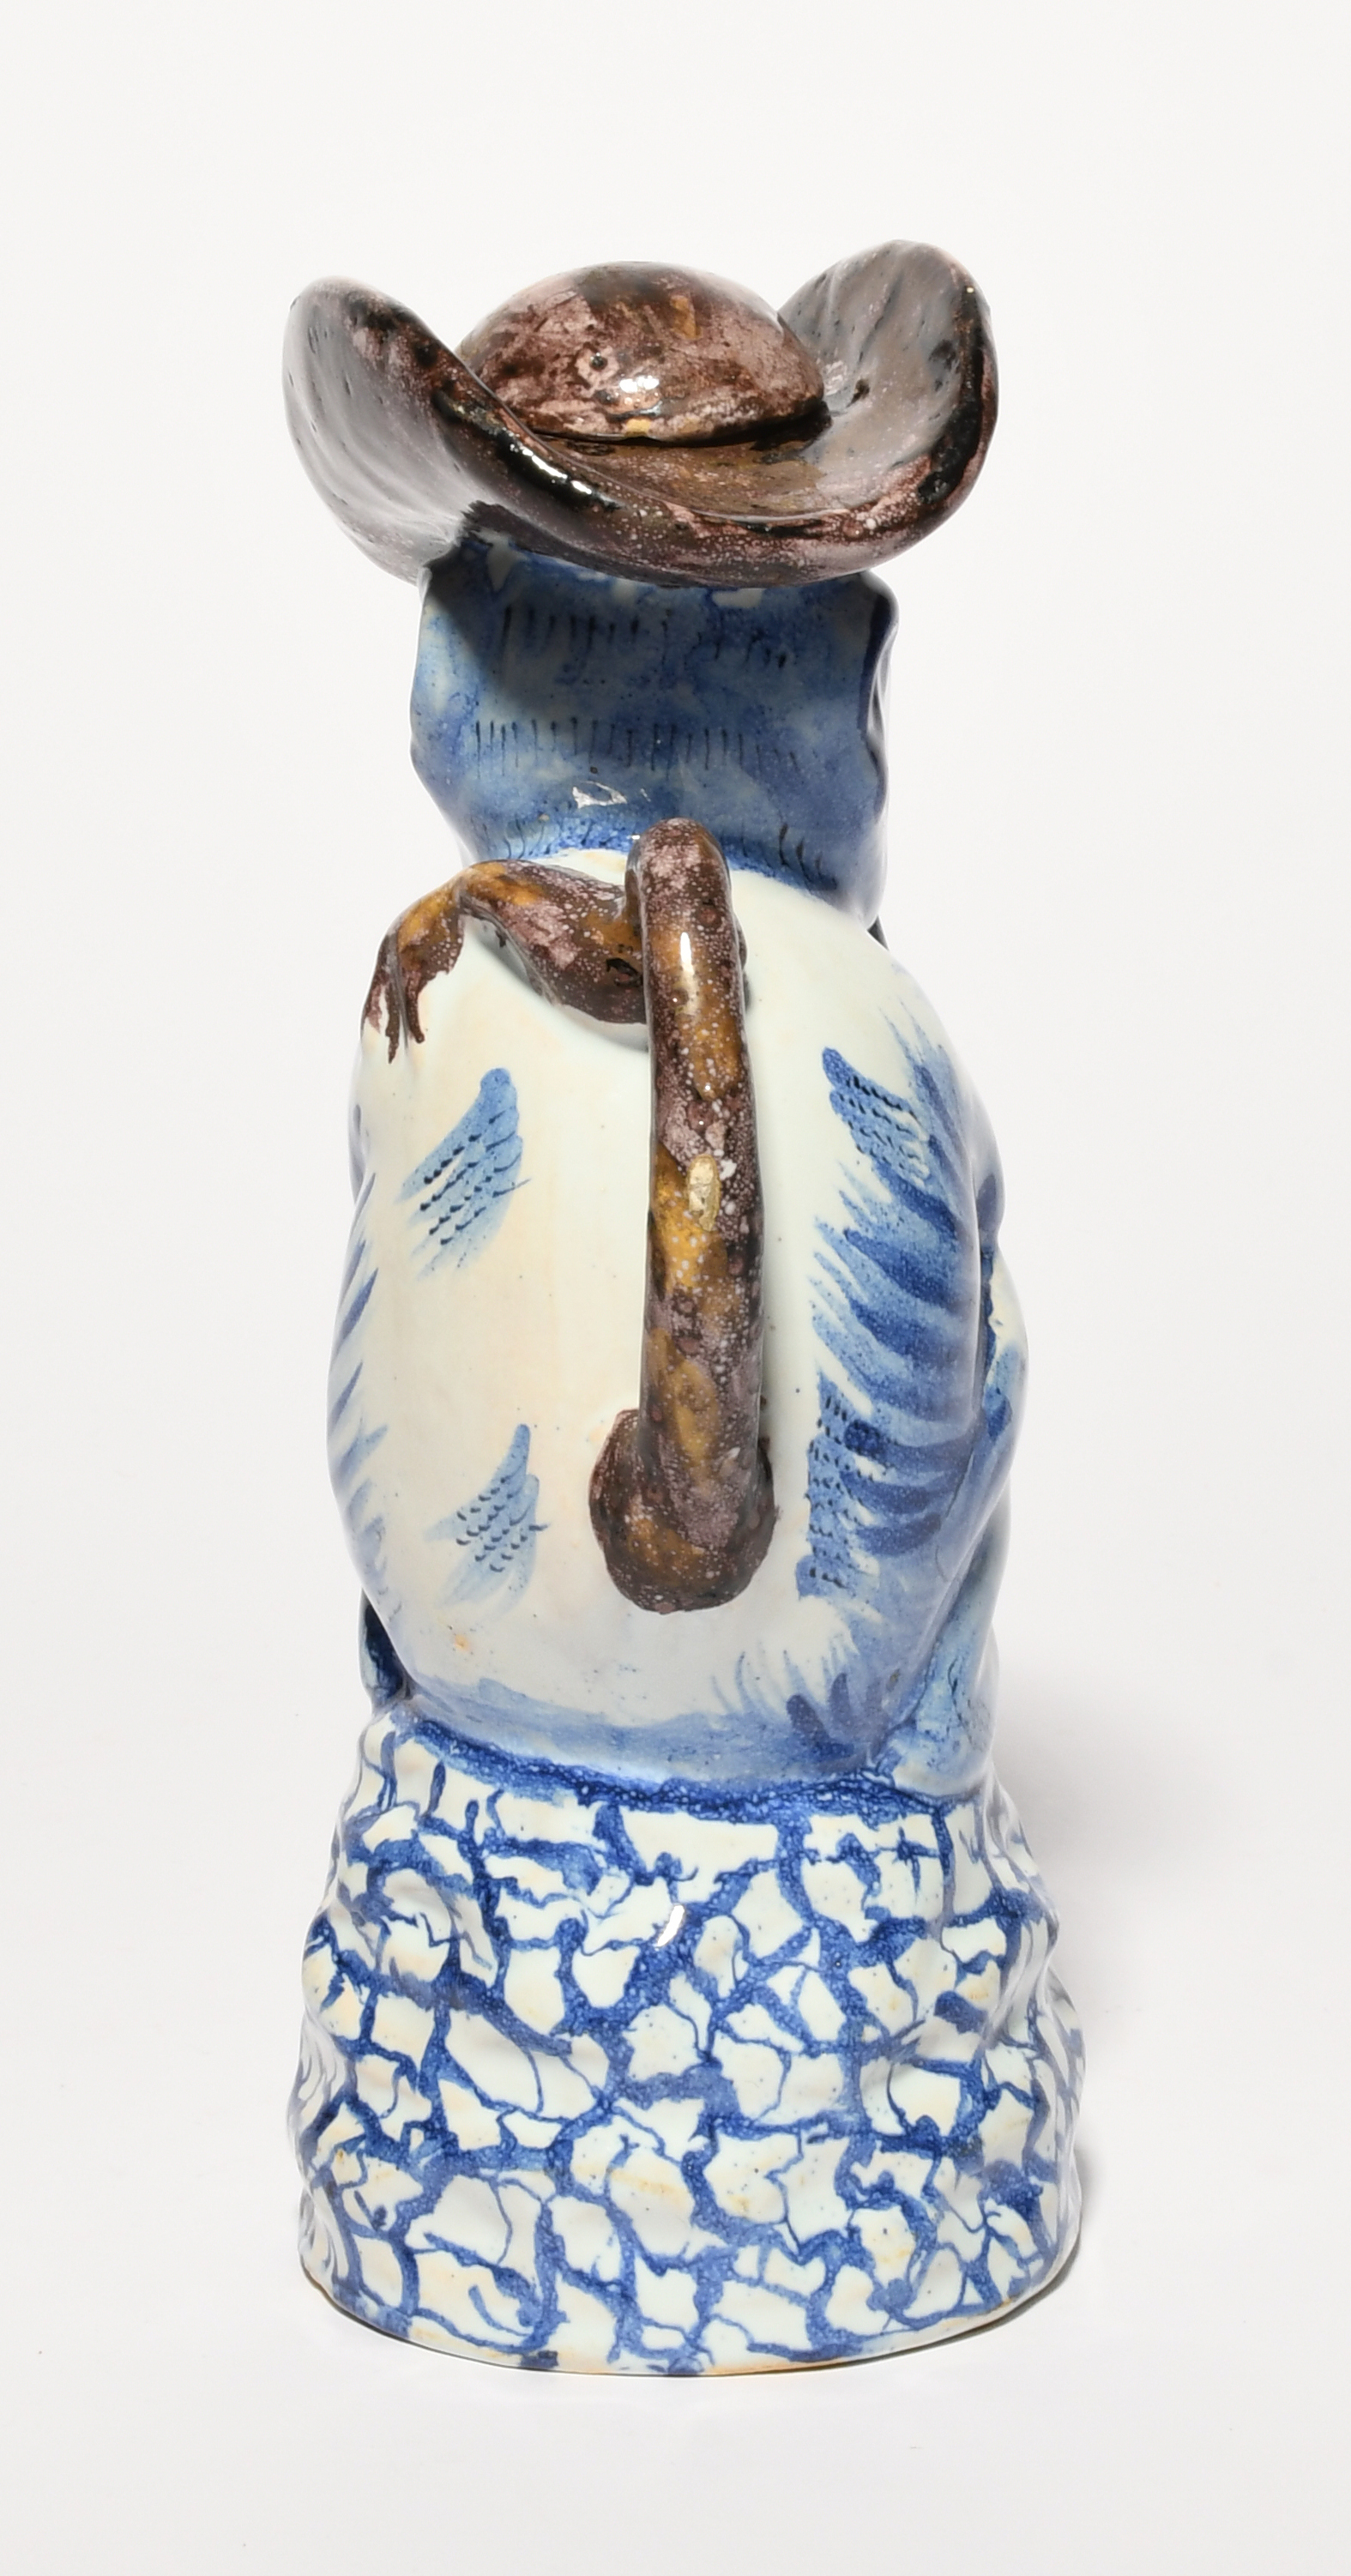 A Delft comical monkey jug and cover, mid 18th century, modelled as a monkey holding a fruit up to - Image 2 of 3